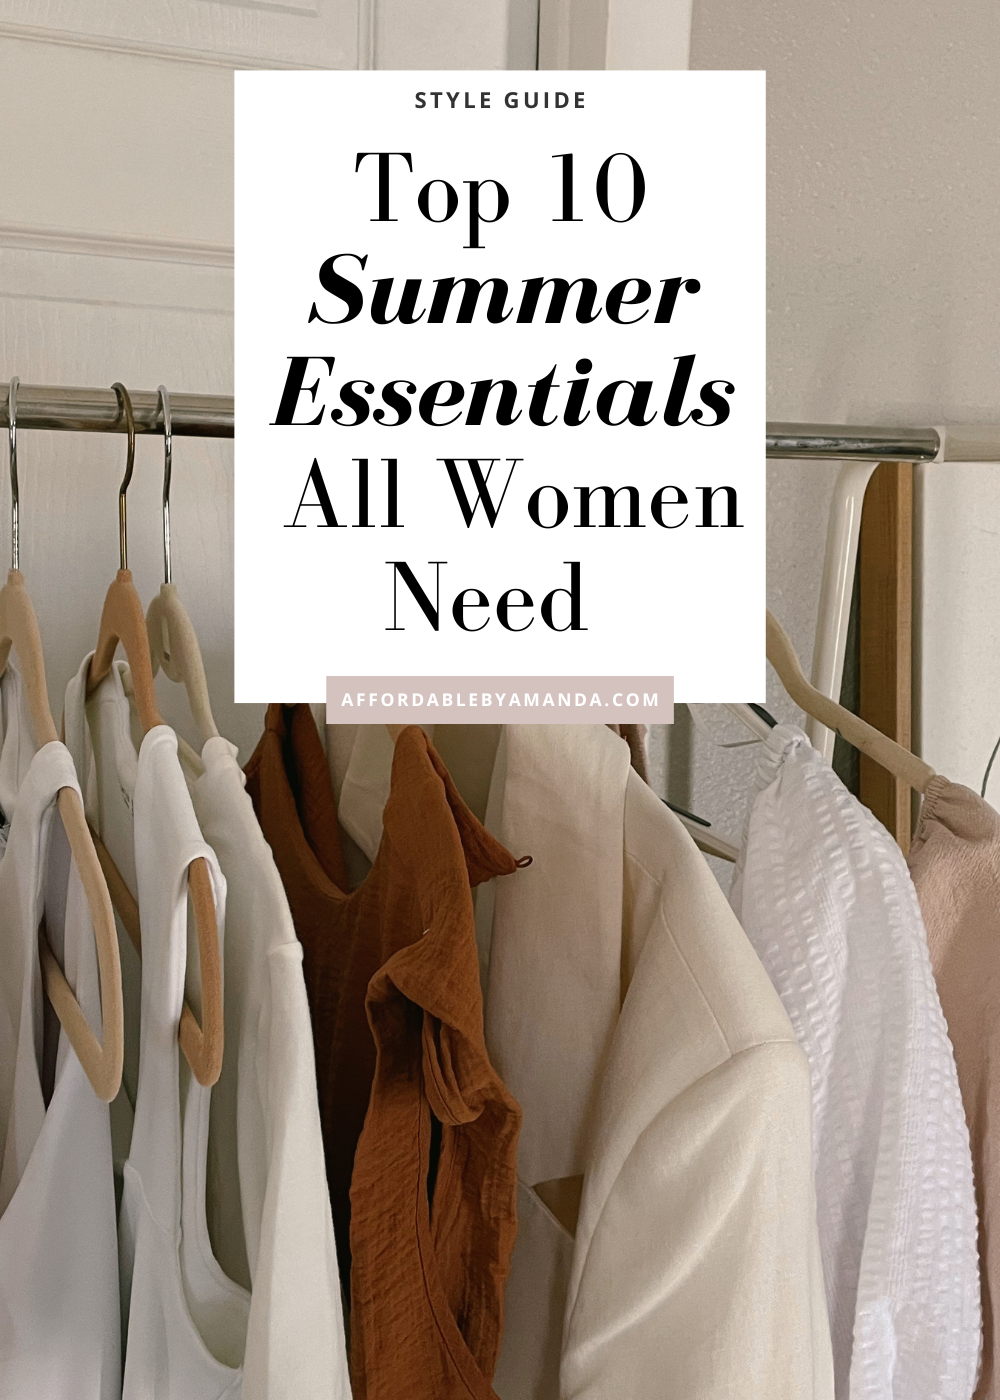 The Top 10 Summer Essentials All Women Need